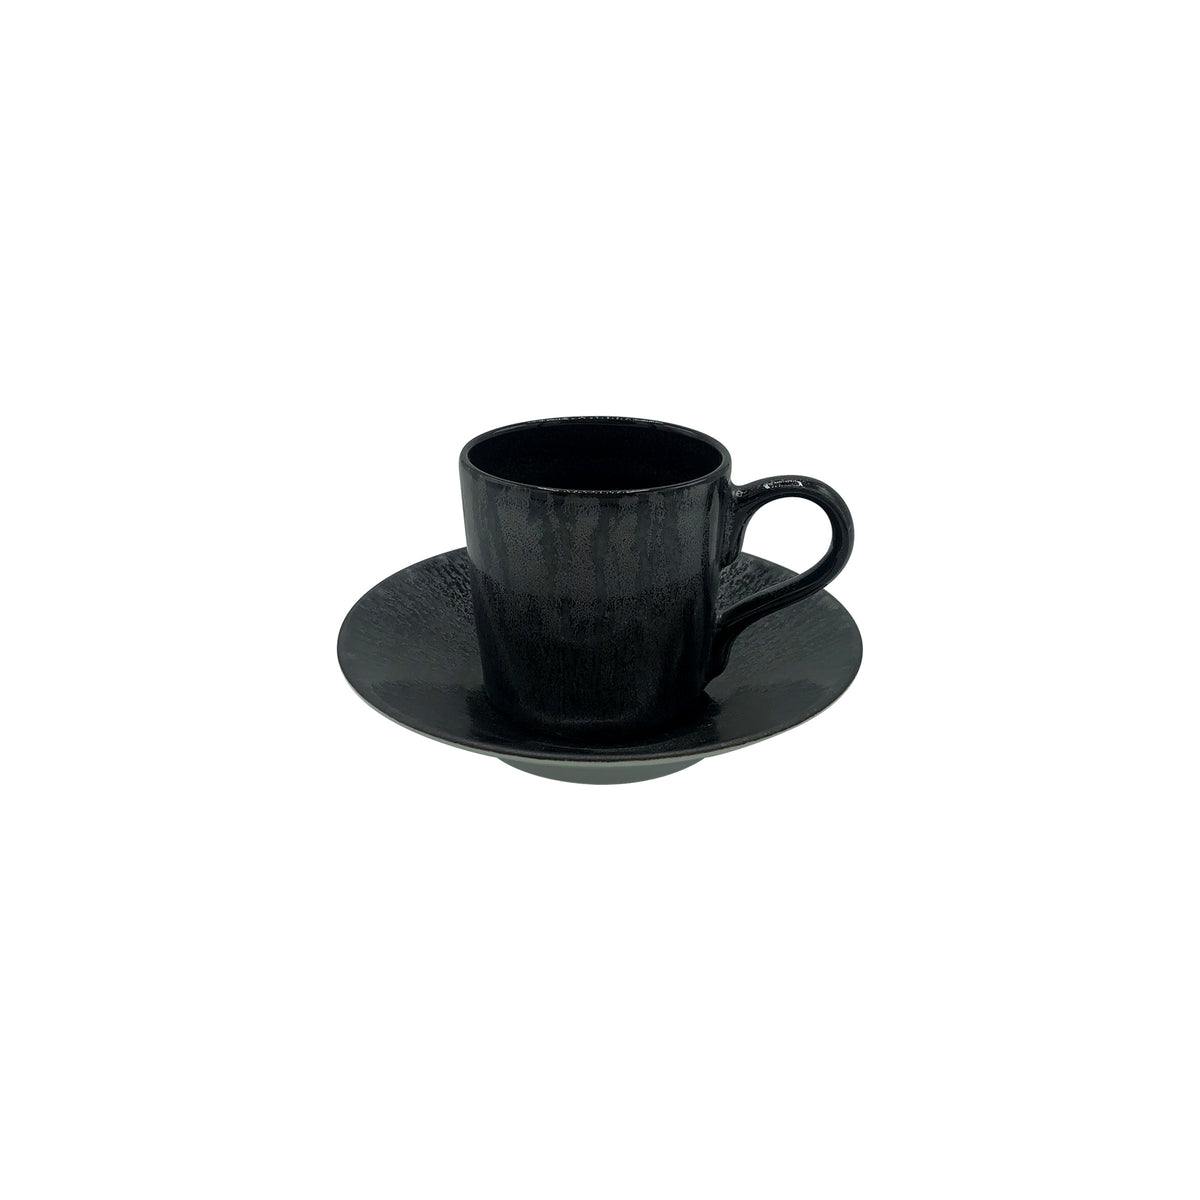 THE HOURS OF THE NIGHT - Coffee set (cup & saucer)